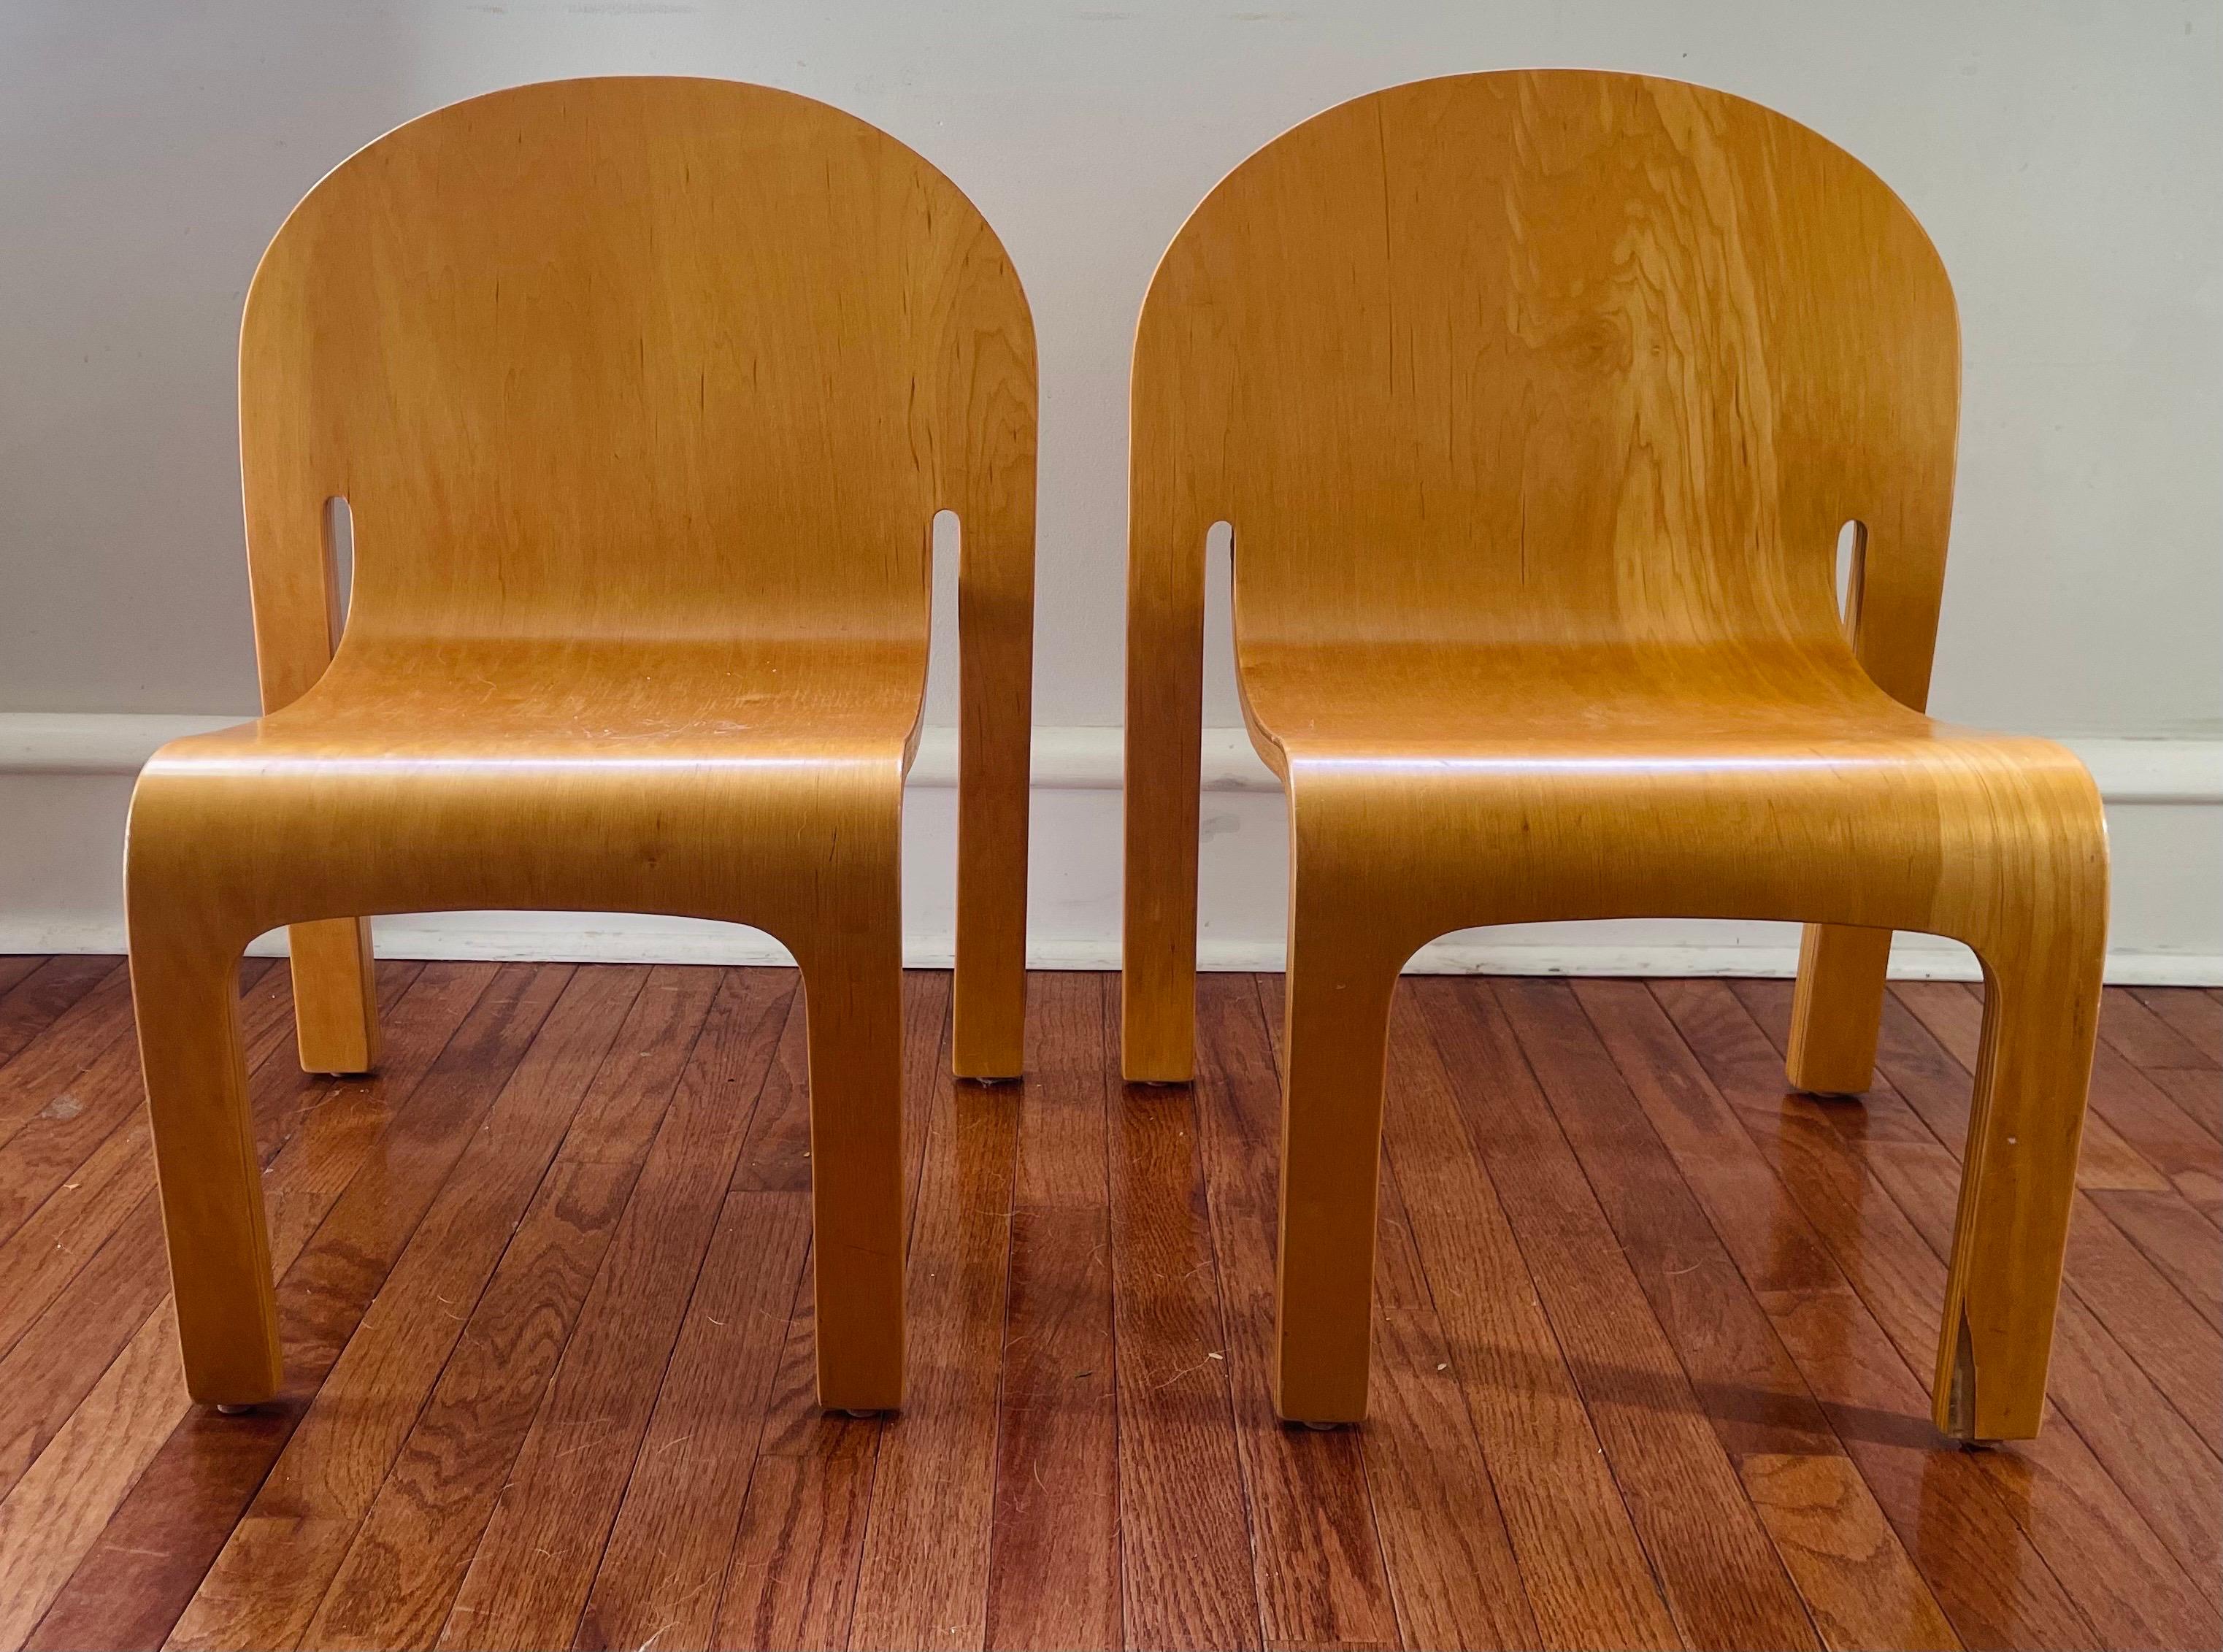 Children's Bodyform Chairs by Peter Danko, 1980s, American For Sale 5